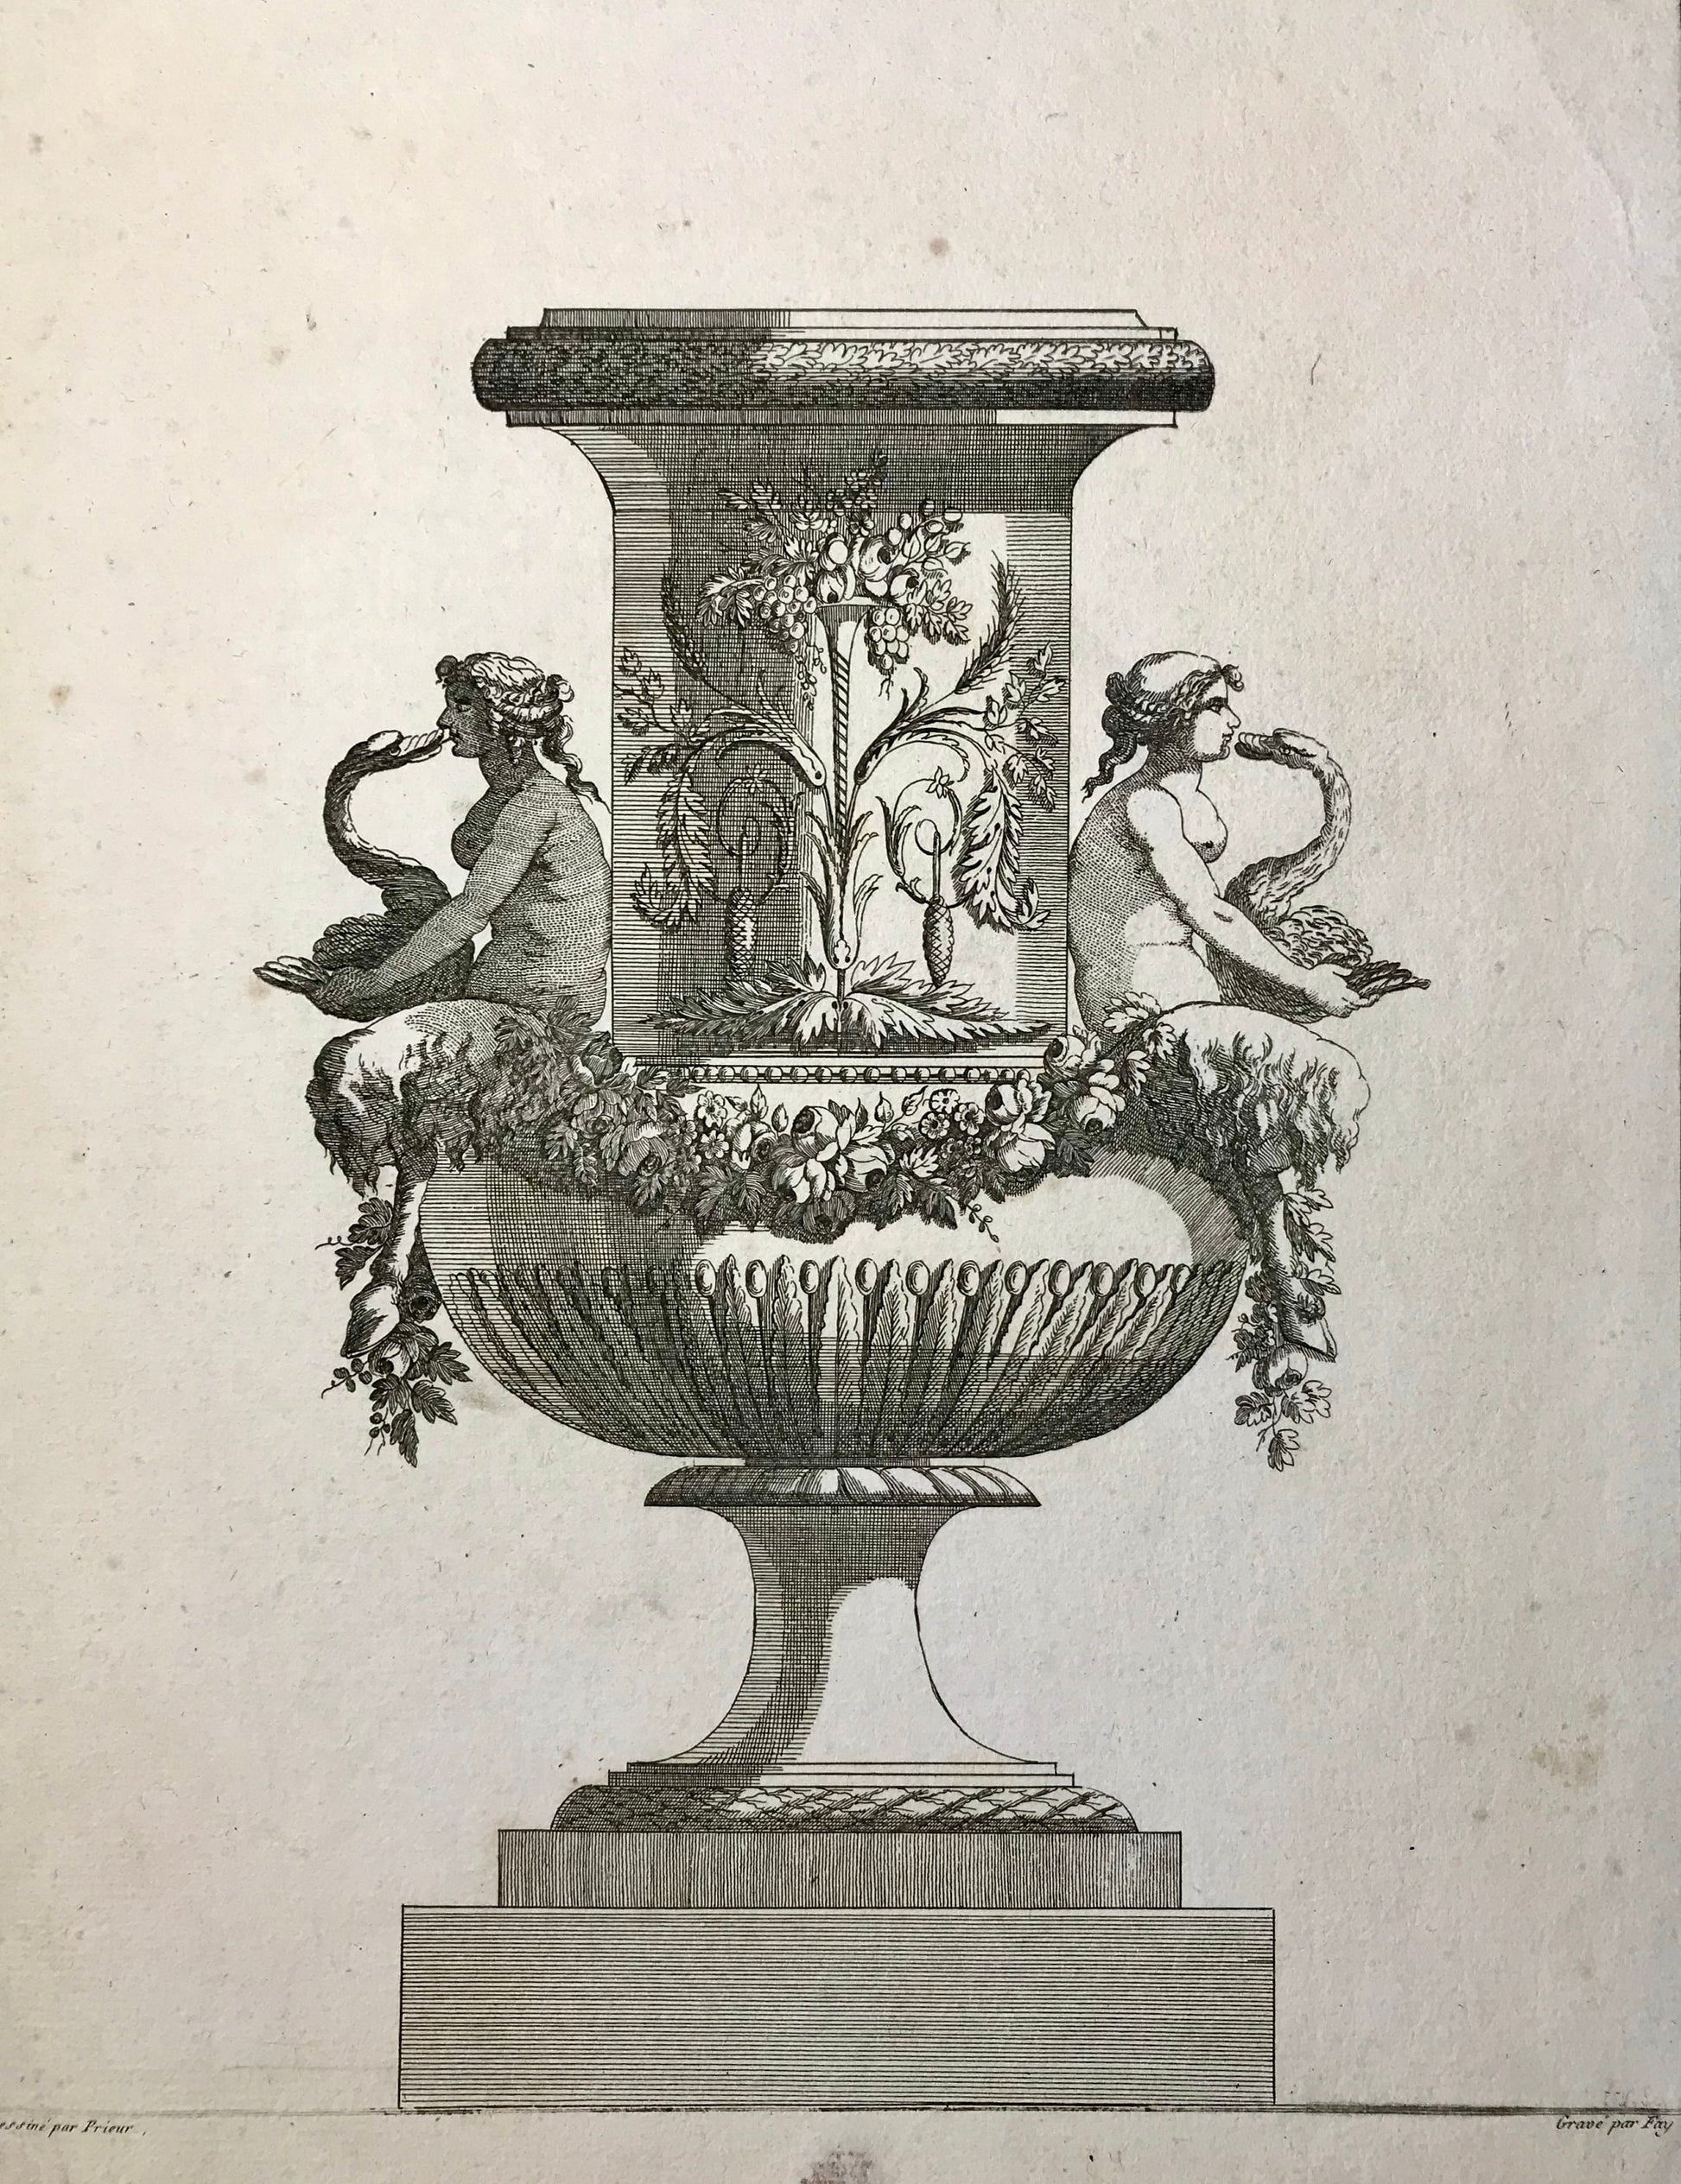 3 Original Engravings. Designs for Vases. Designed by Jean-Louis Prieur (1732-95). French. Late 18th Century. Size: 32.5 x 26 cms.